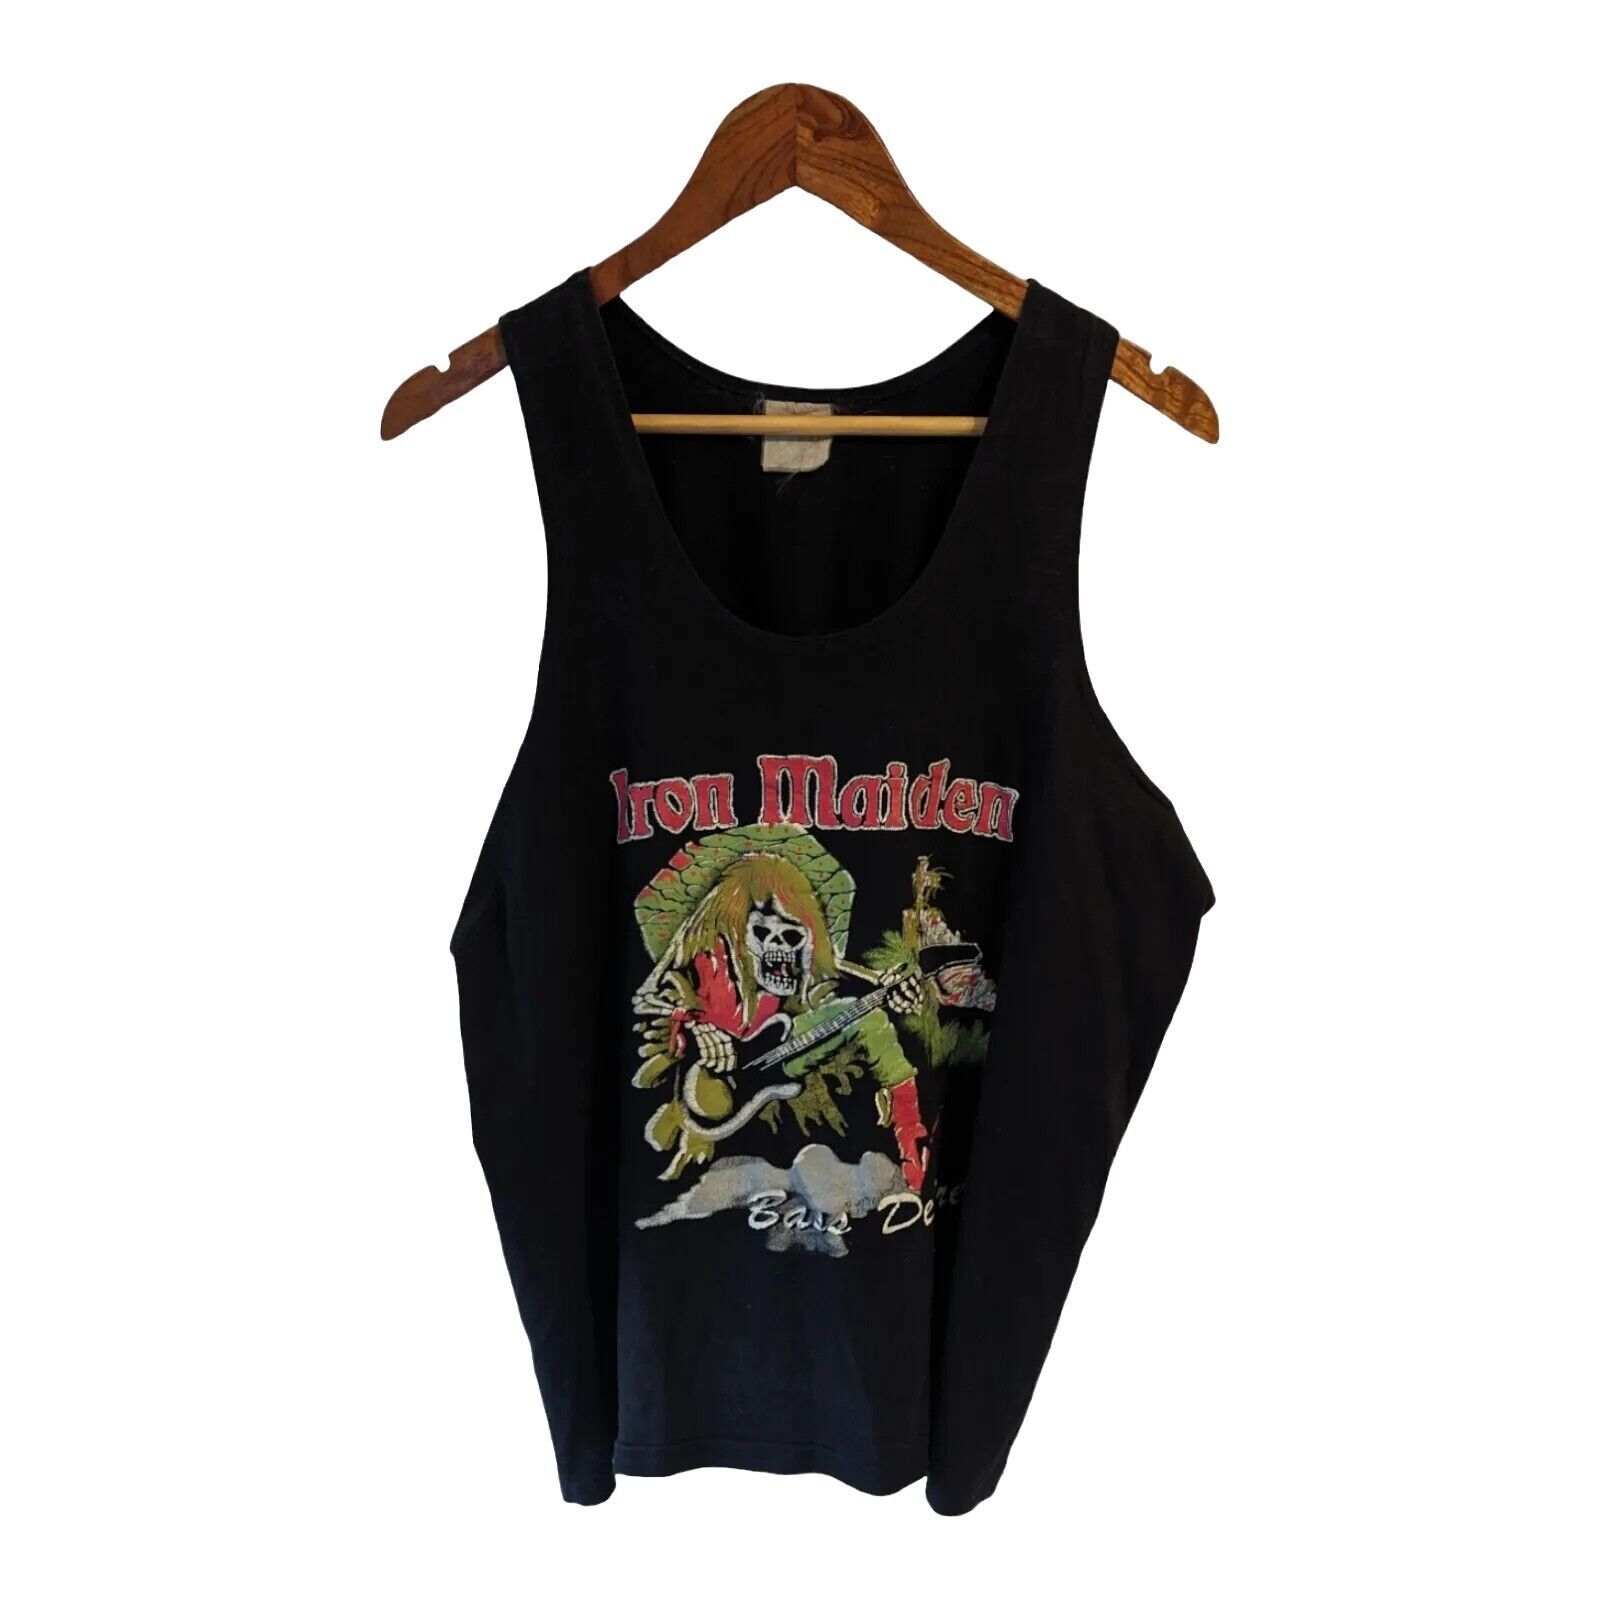 Iron Maiden Vest Size Small Vintage Band Tee Heavy Metal Music Black Bass Desire